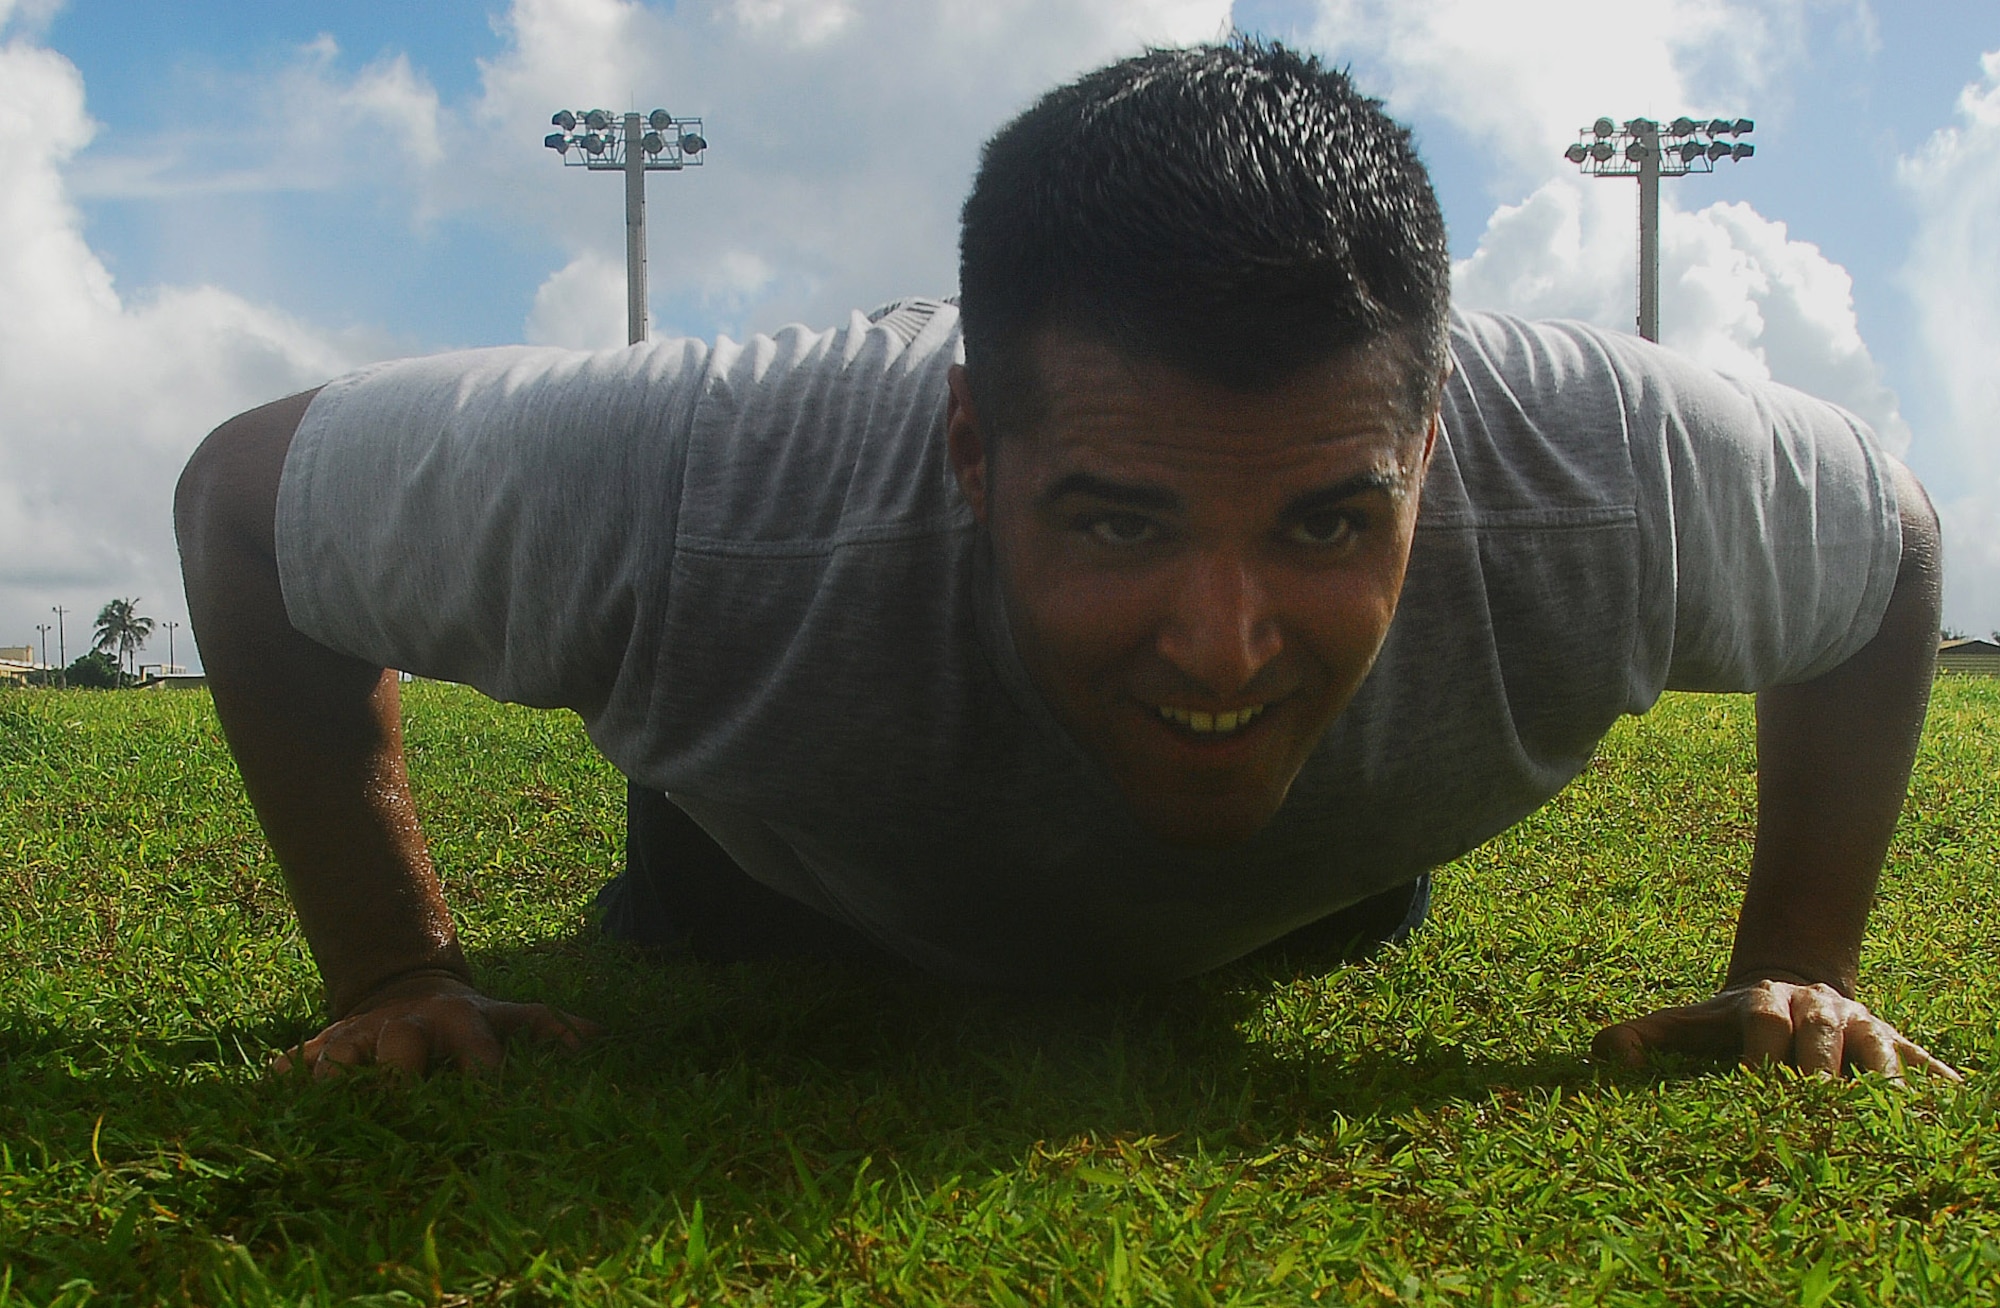 Staff Sgt. Louis Almaguer completes a correct push-up by lowering his body to the ground and making sure his elbows are bent at least 90 degrees or less before pushing back up to the starting position. The new fitness assesment allocates 60% for Aerobic (run or walk), 20% for abdominal circumference and 10% each for sit ups and pushups.  Sergeant Almaguer is  the NCO in charge of Construction Management with the 36th Civil Engineer Squadron.  (U.S. Air Force photo/Staff Sgt. Jamie Powell)

